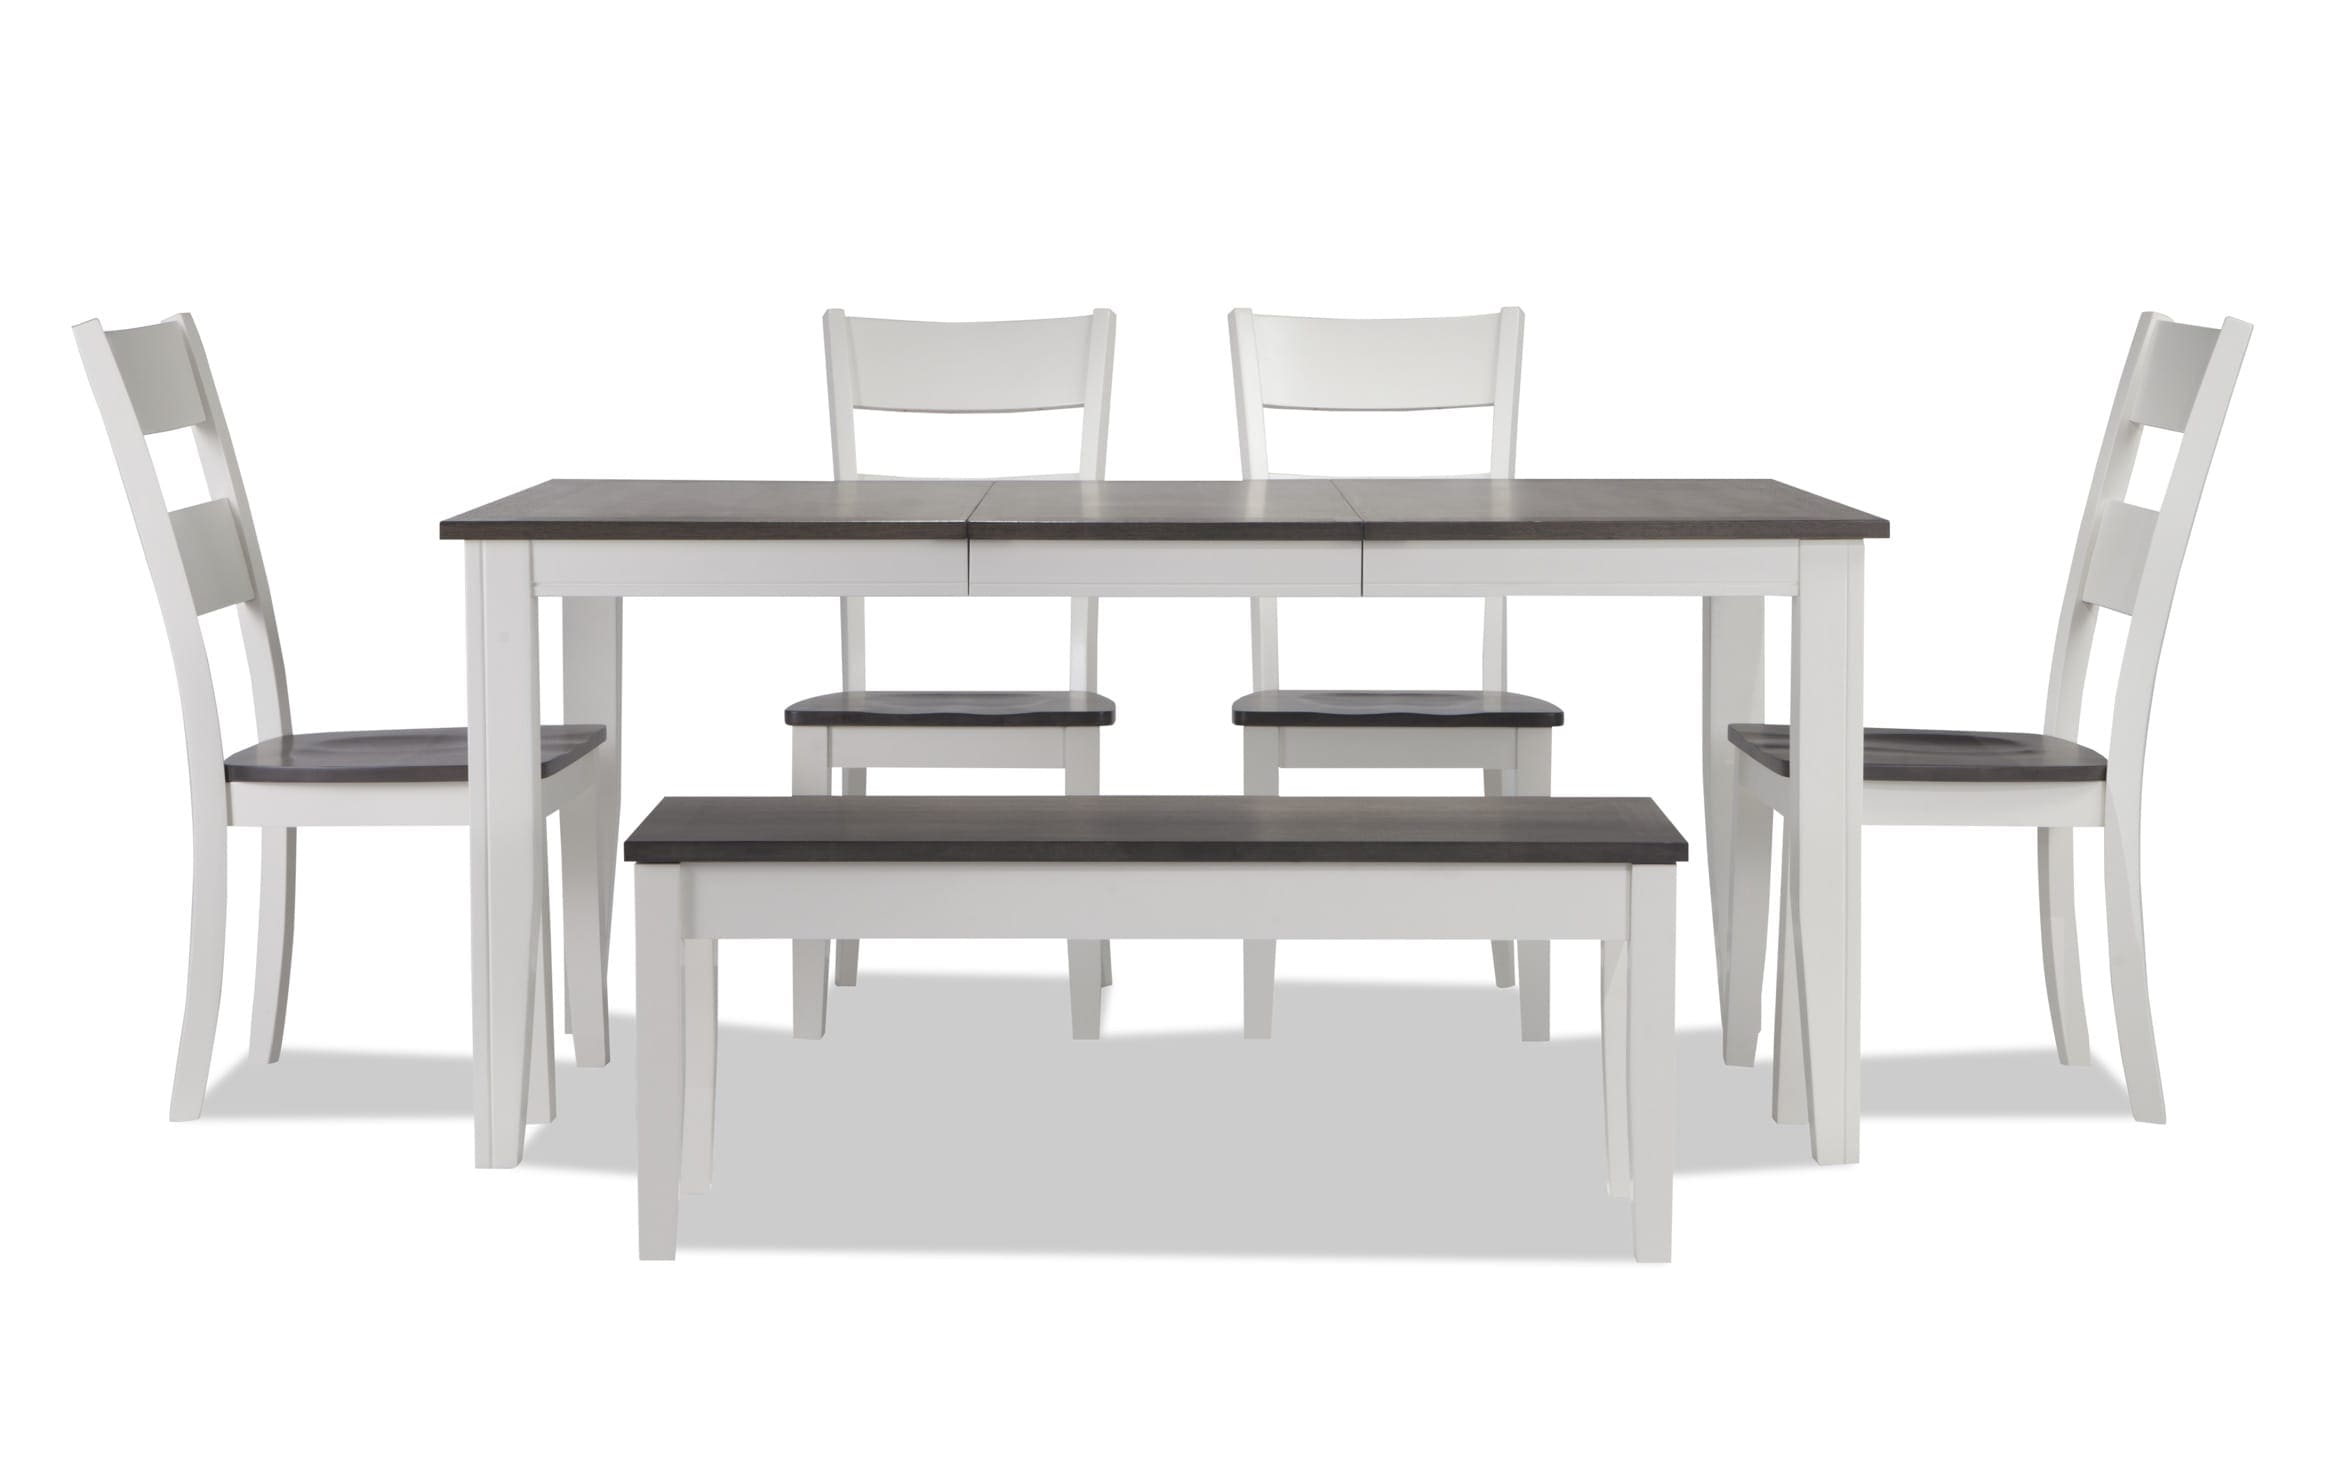 6 Piece Dining Set With Storage Bench, Dining Room Set With White Chairs